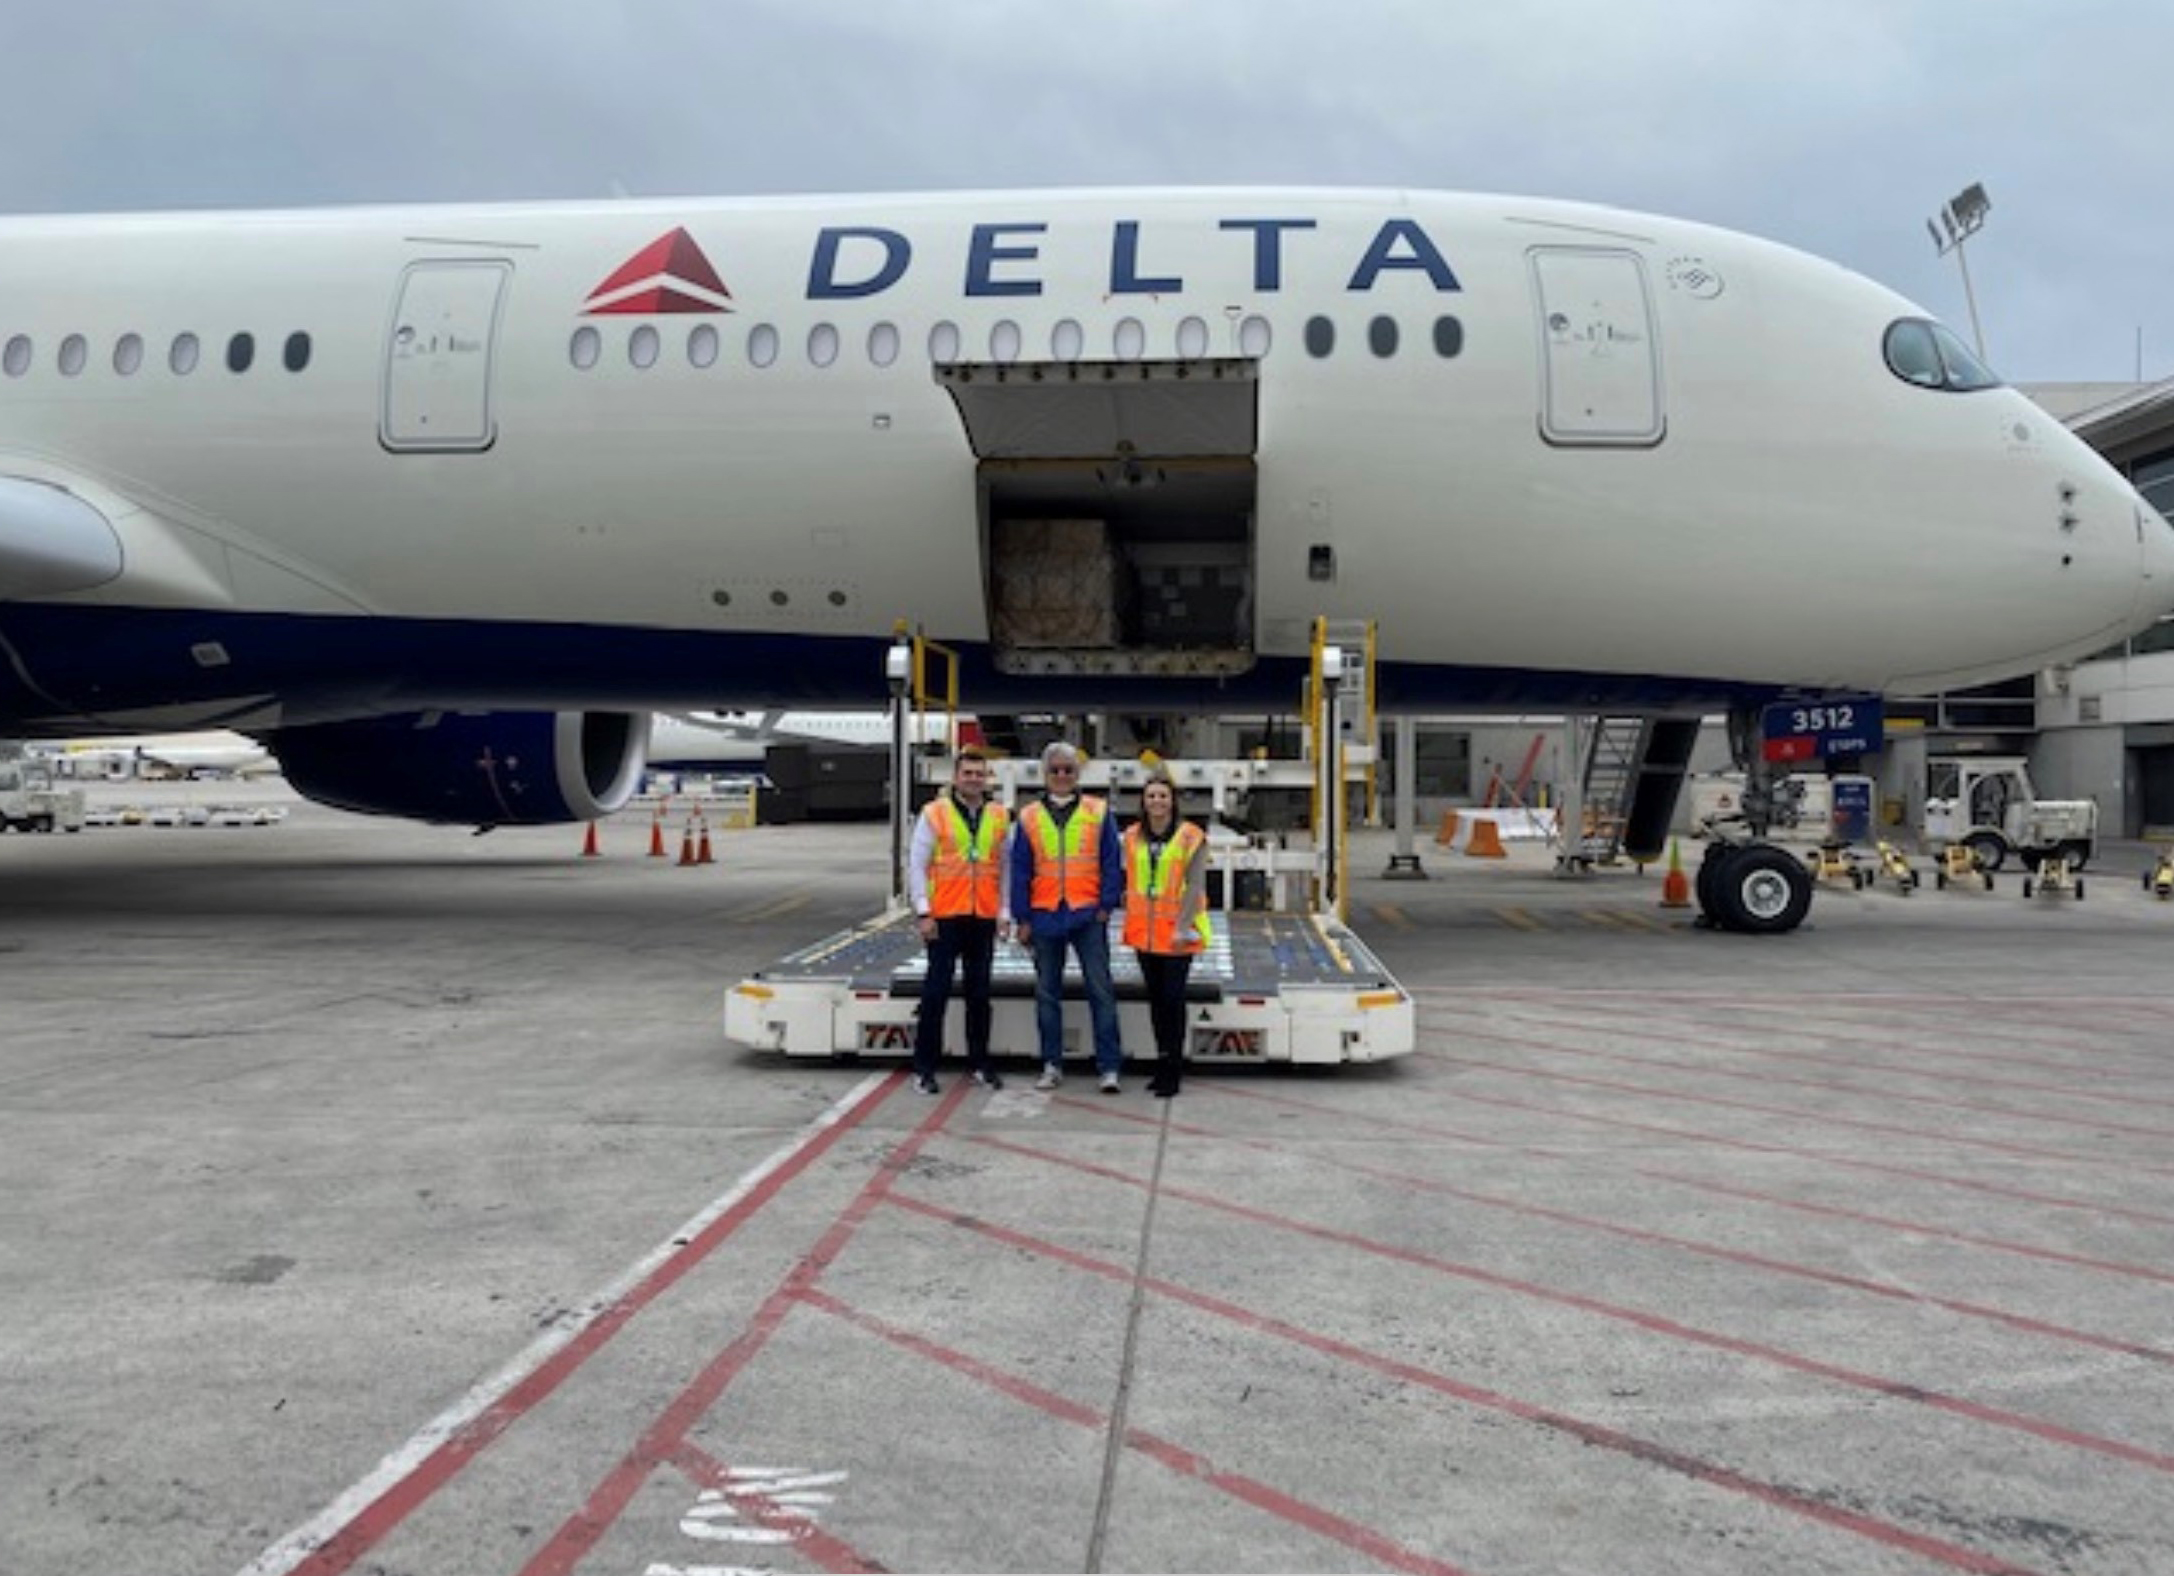 With a little help from our friends (at Delta)